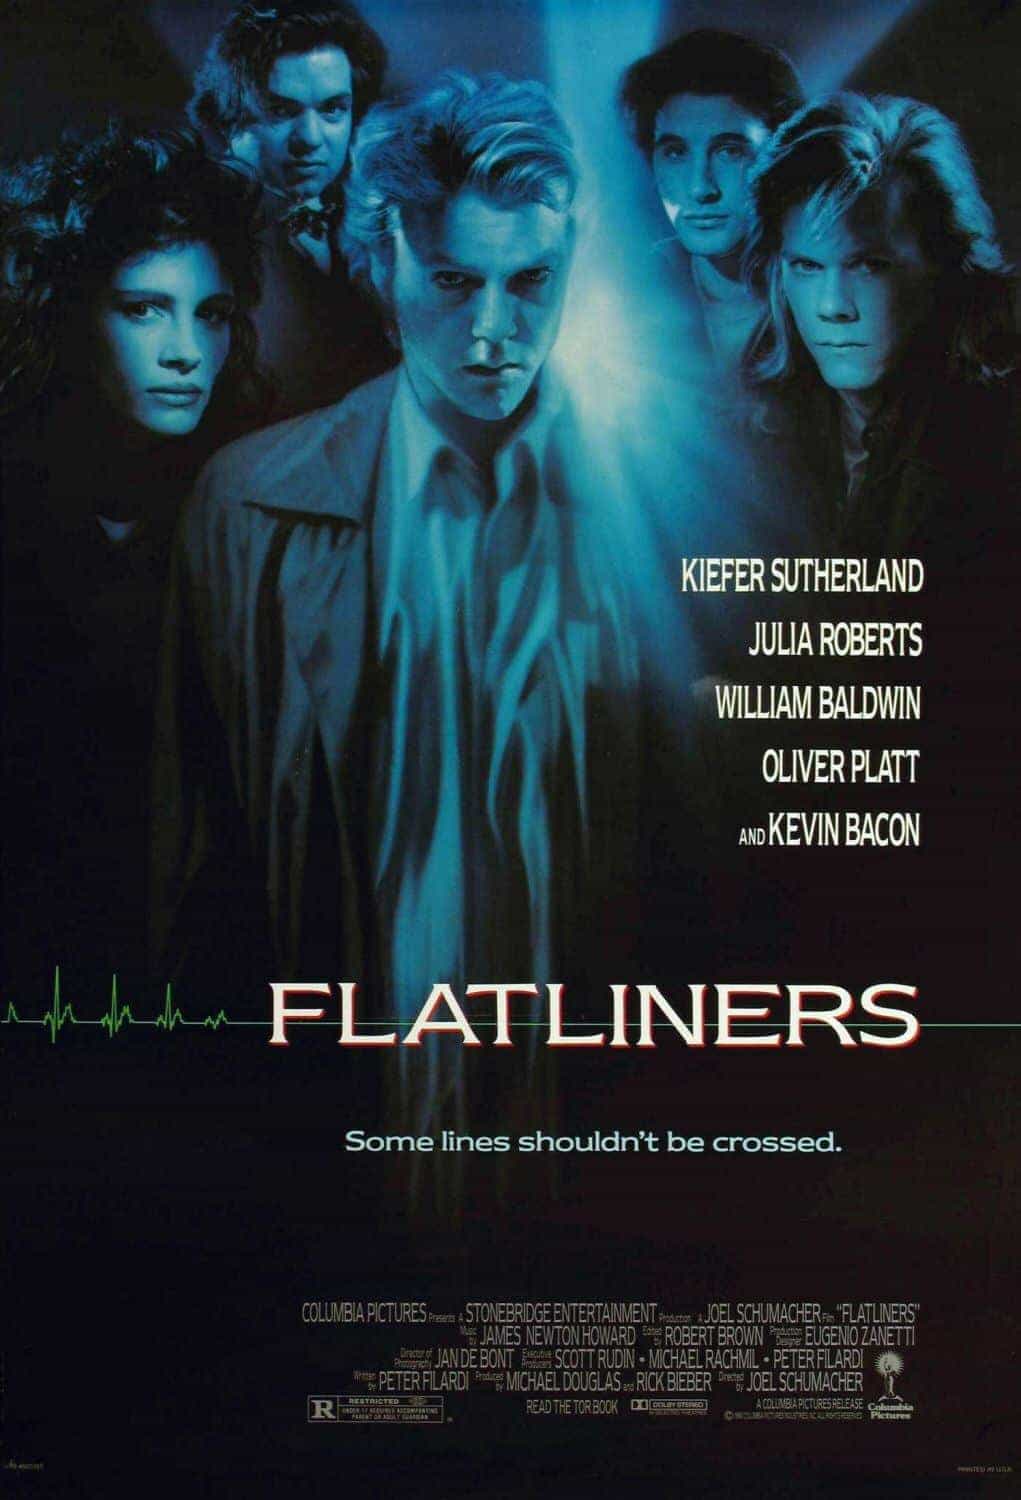 Historical UK Box Office Early November - Flatliners was the top new film at number 1 in 1990